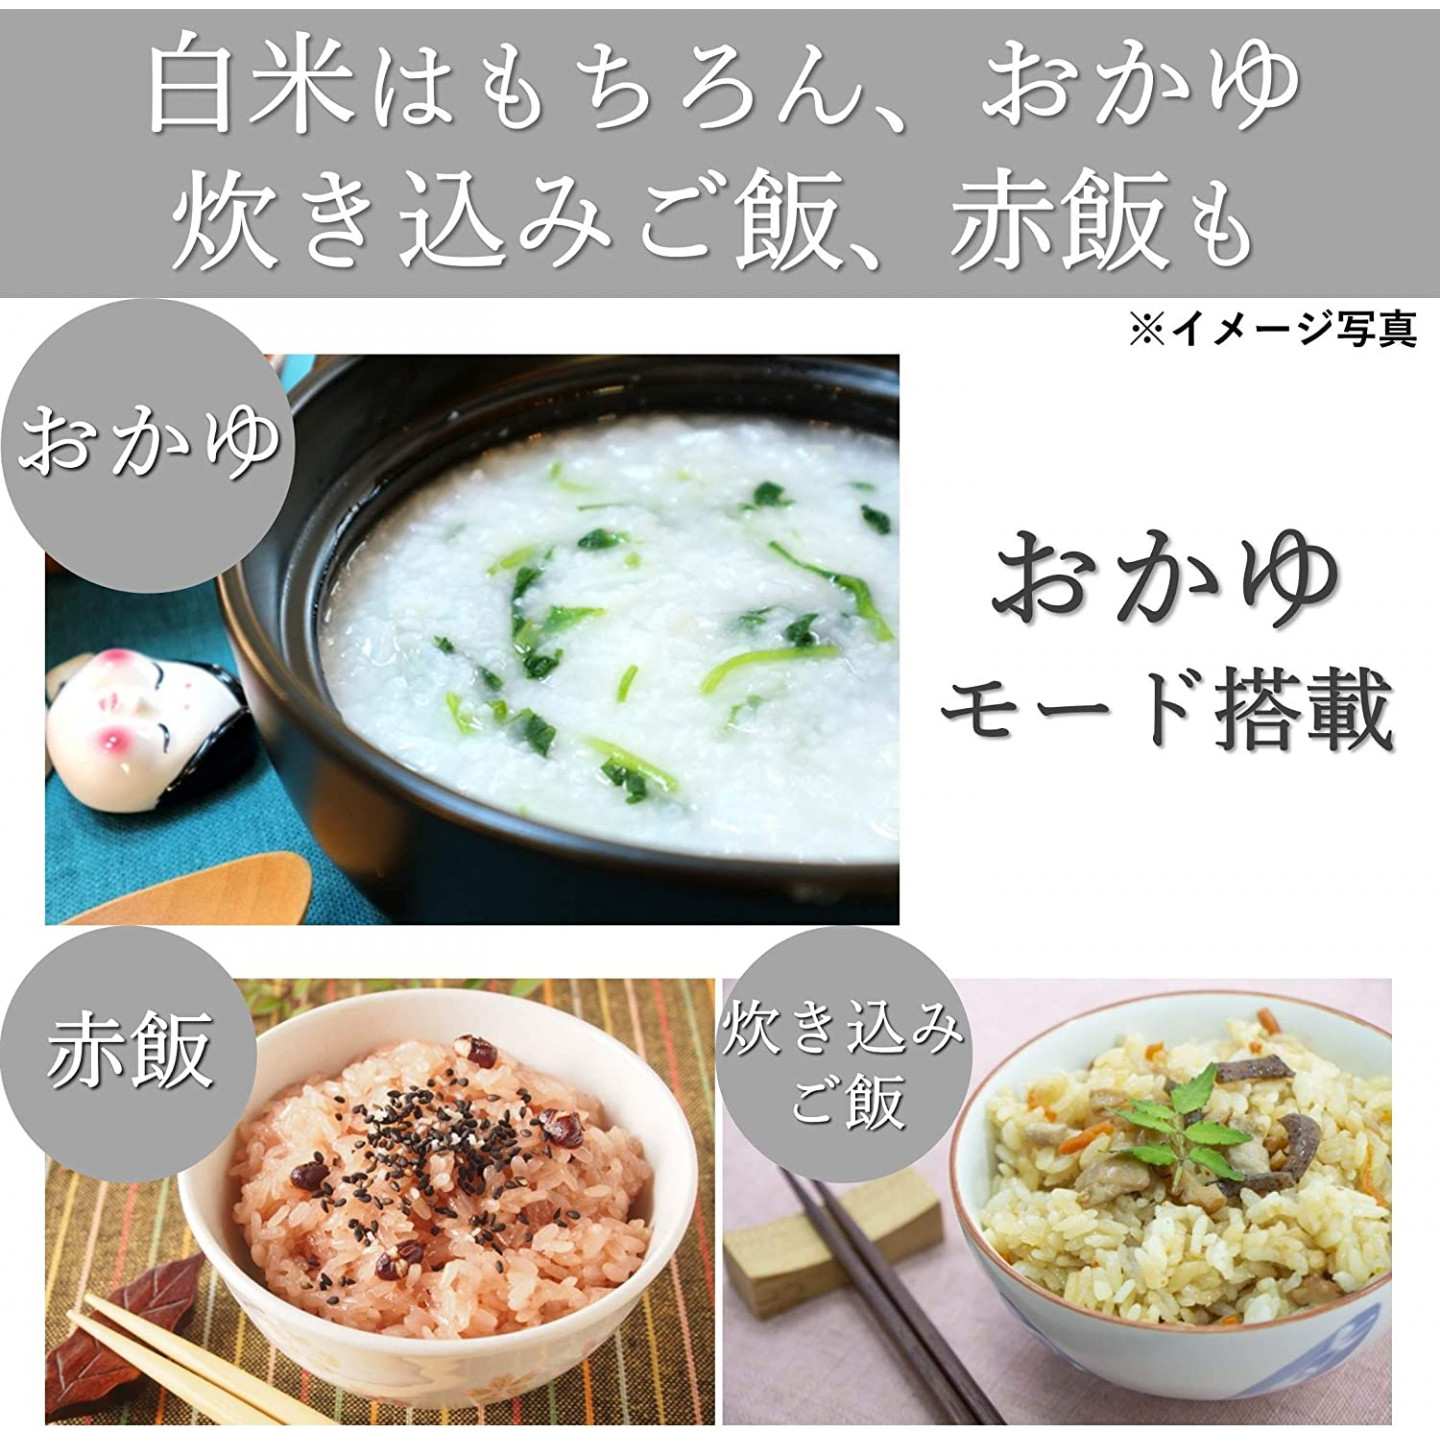 Yamazen] rice cooker 0.5~1.5 go For living alone Microcomputer type Small Mini  rice cooker Equipped with porridge mode Keep warm Reservation function  black YJG-M150(B) [] YJG-M150(B) 